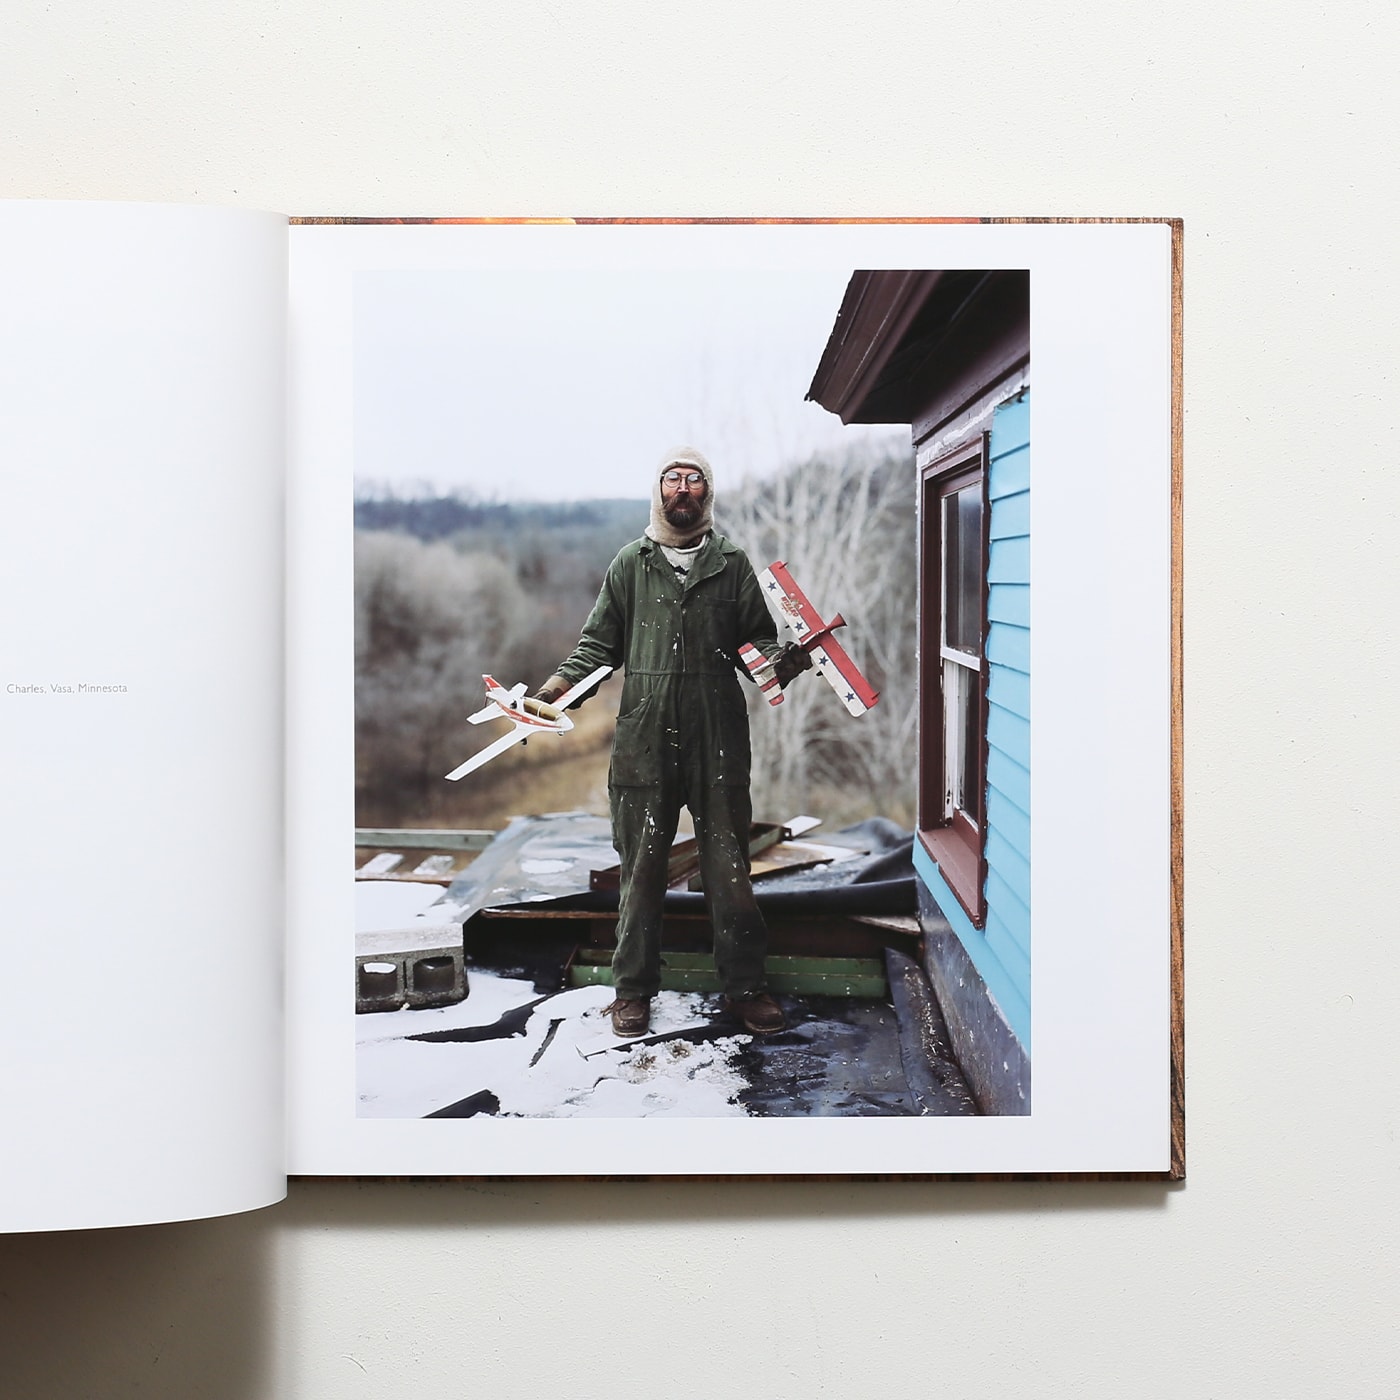 Alec Soth: Sleeping by The Mississippi